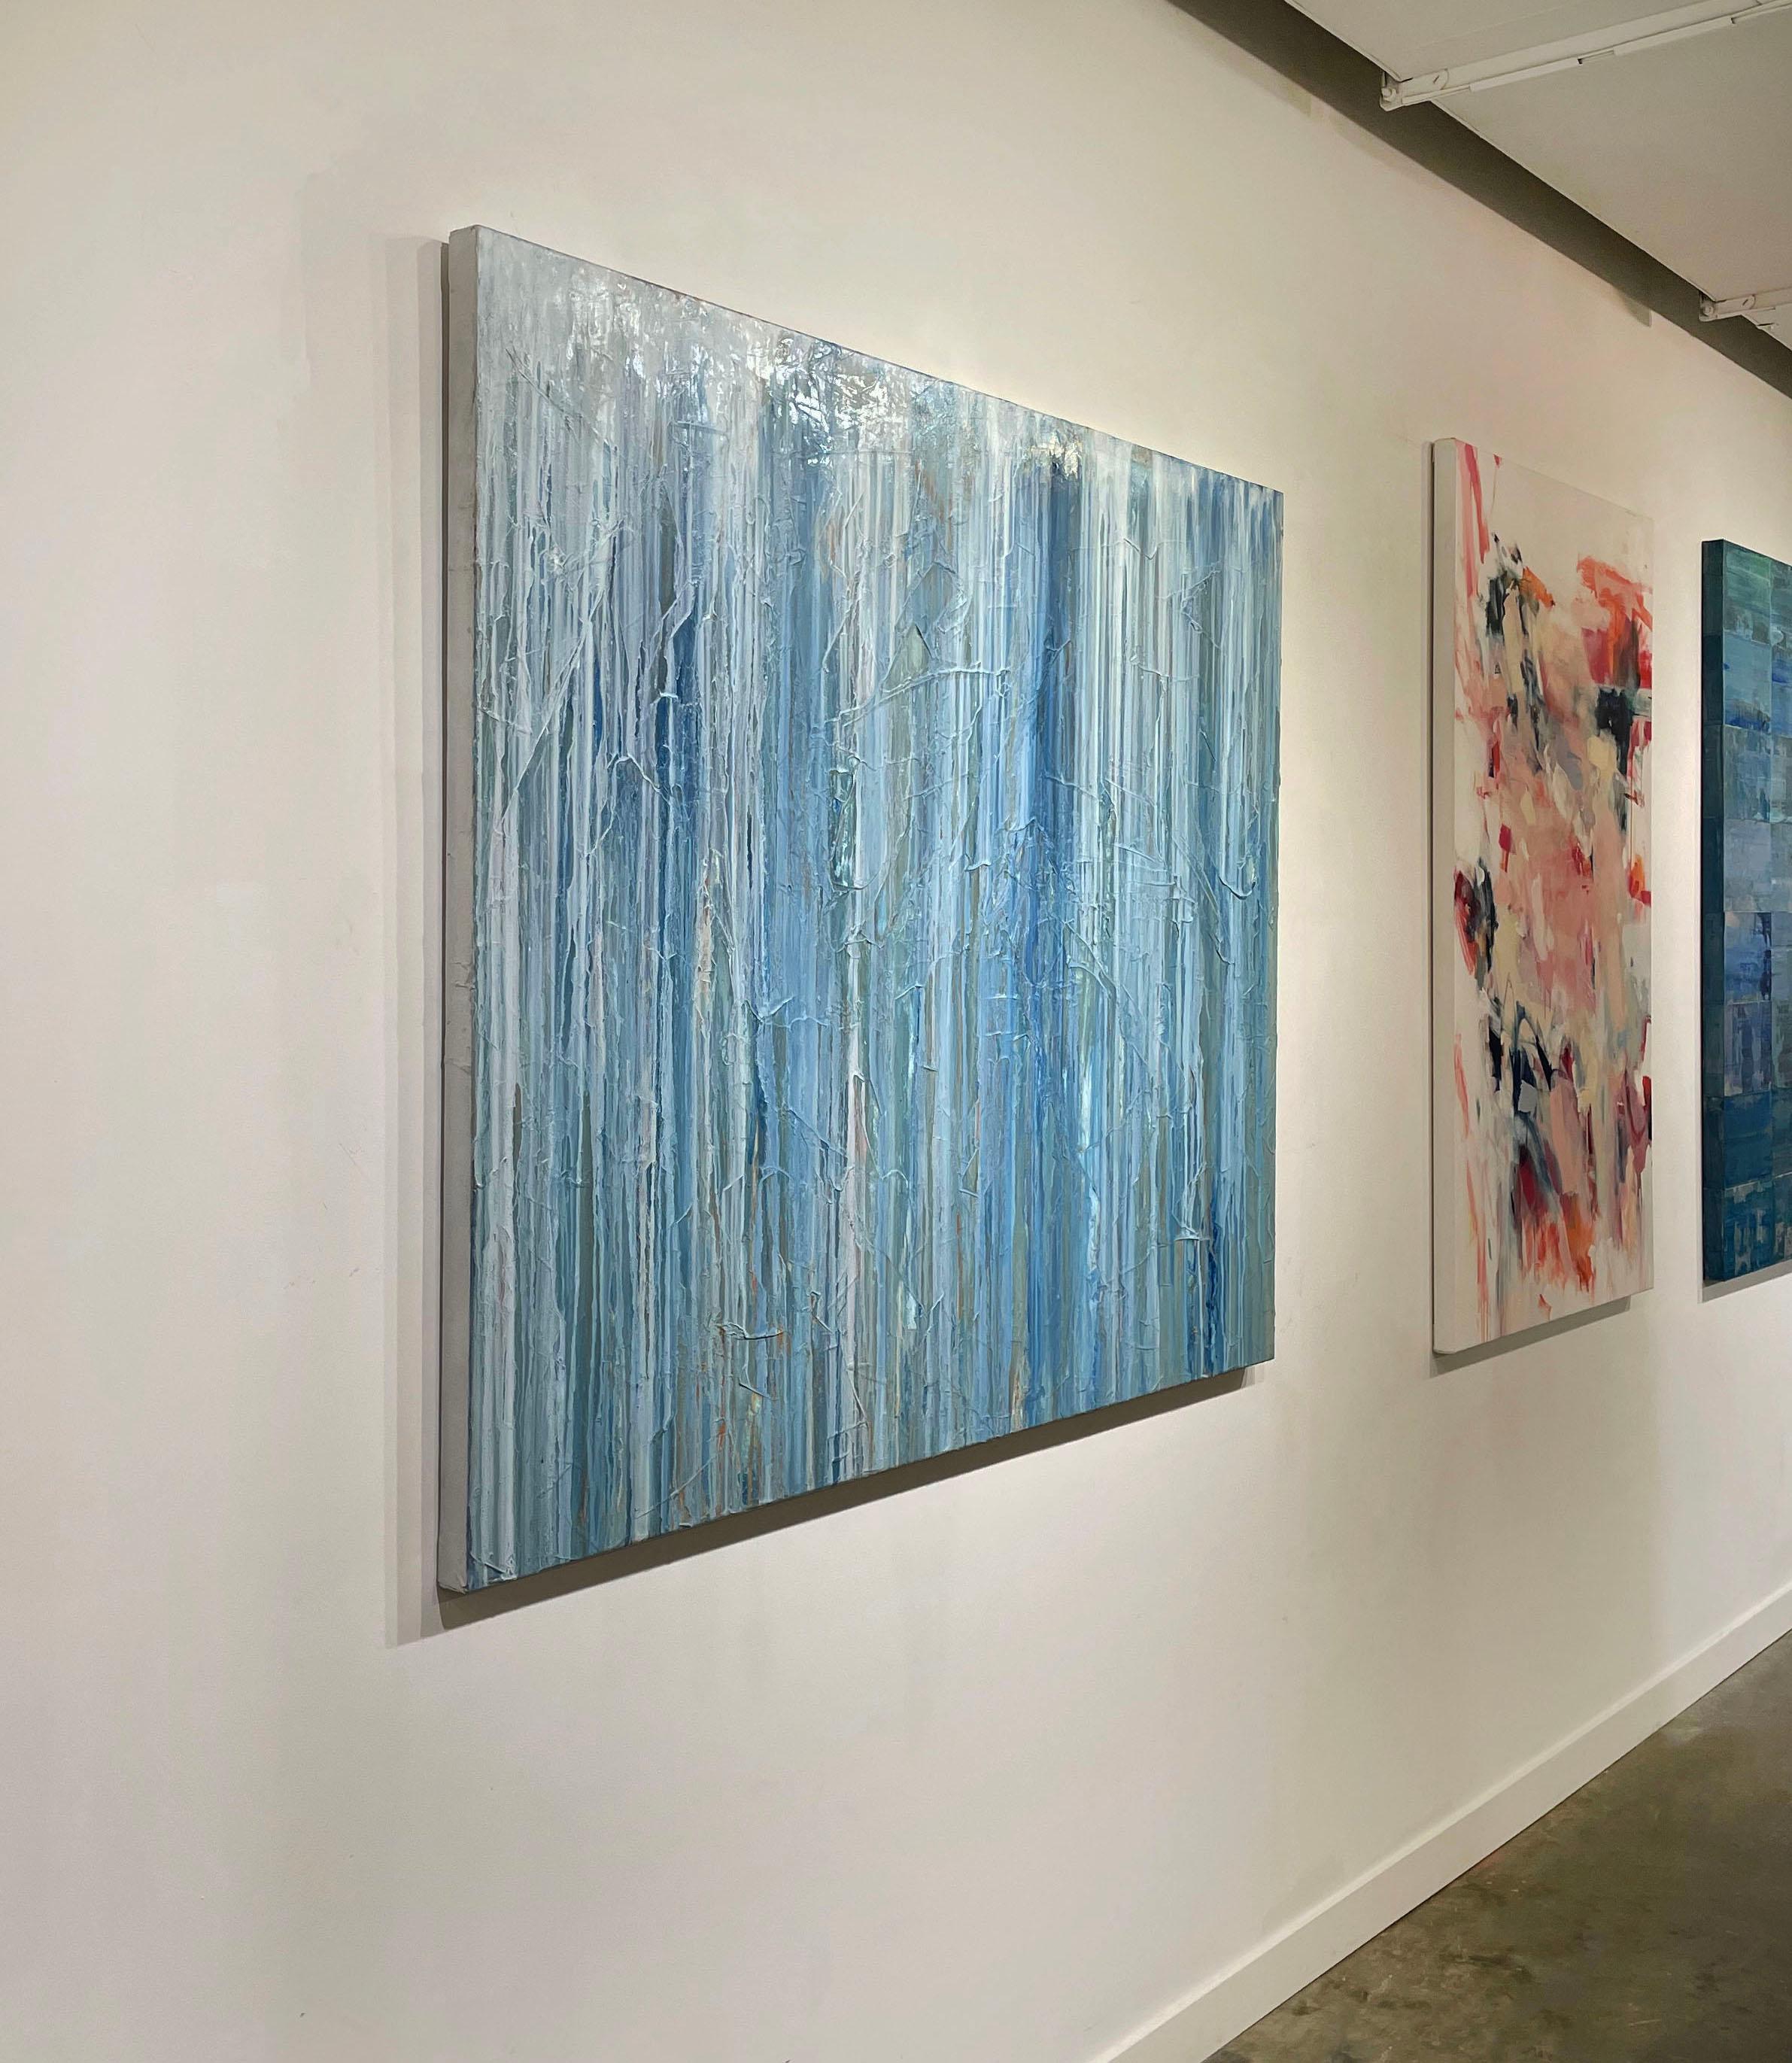 This large abstract statement painting by artist Teodora Guererra is made with oil paint on gallery wrapped canvas, and has clean, platinum painted sides. Blue and white paint appears to fall in light layers of drips down the canvas, over a textured